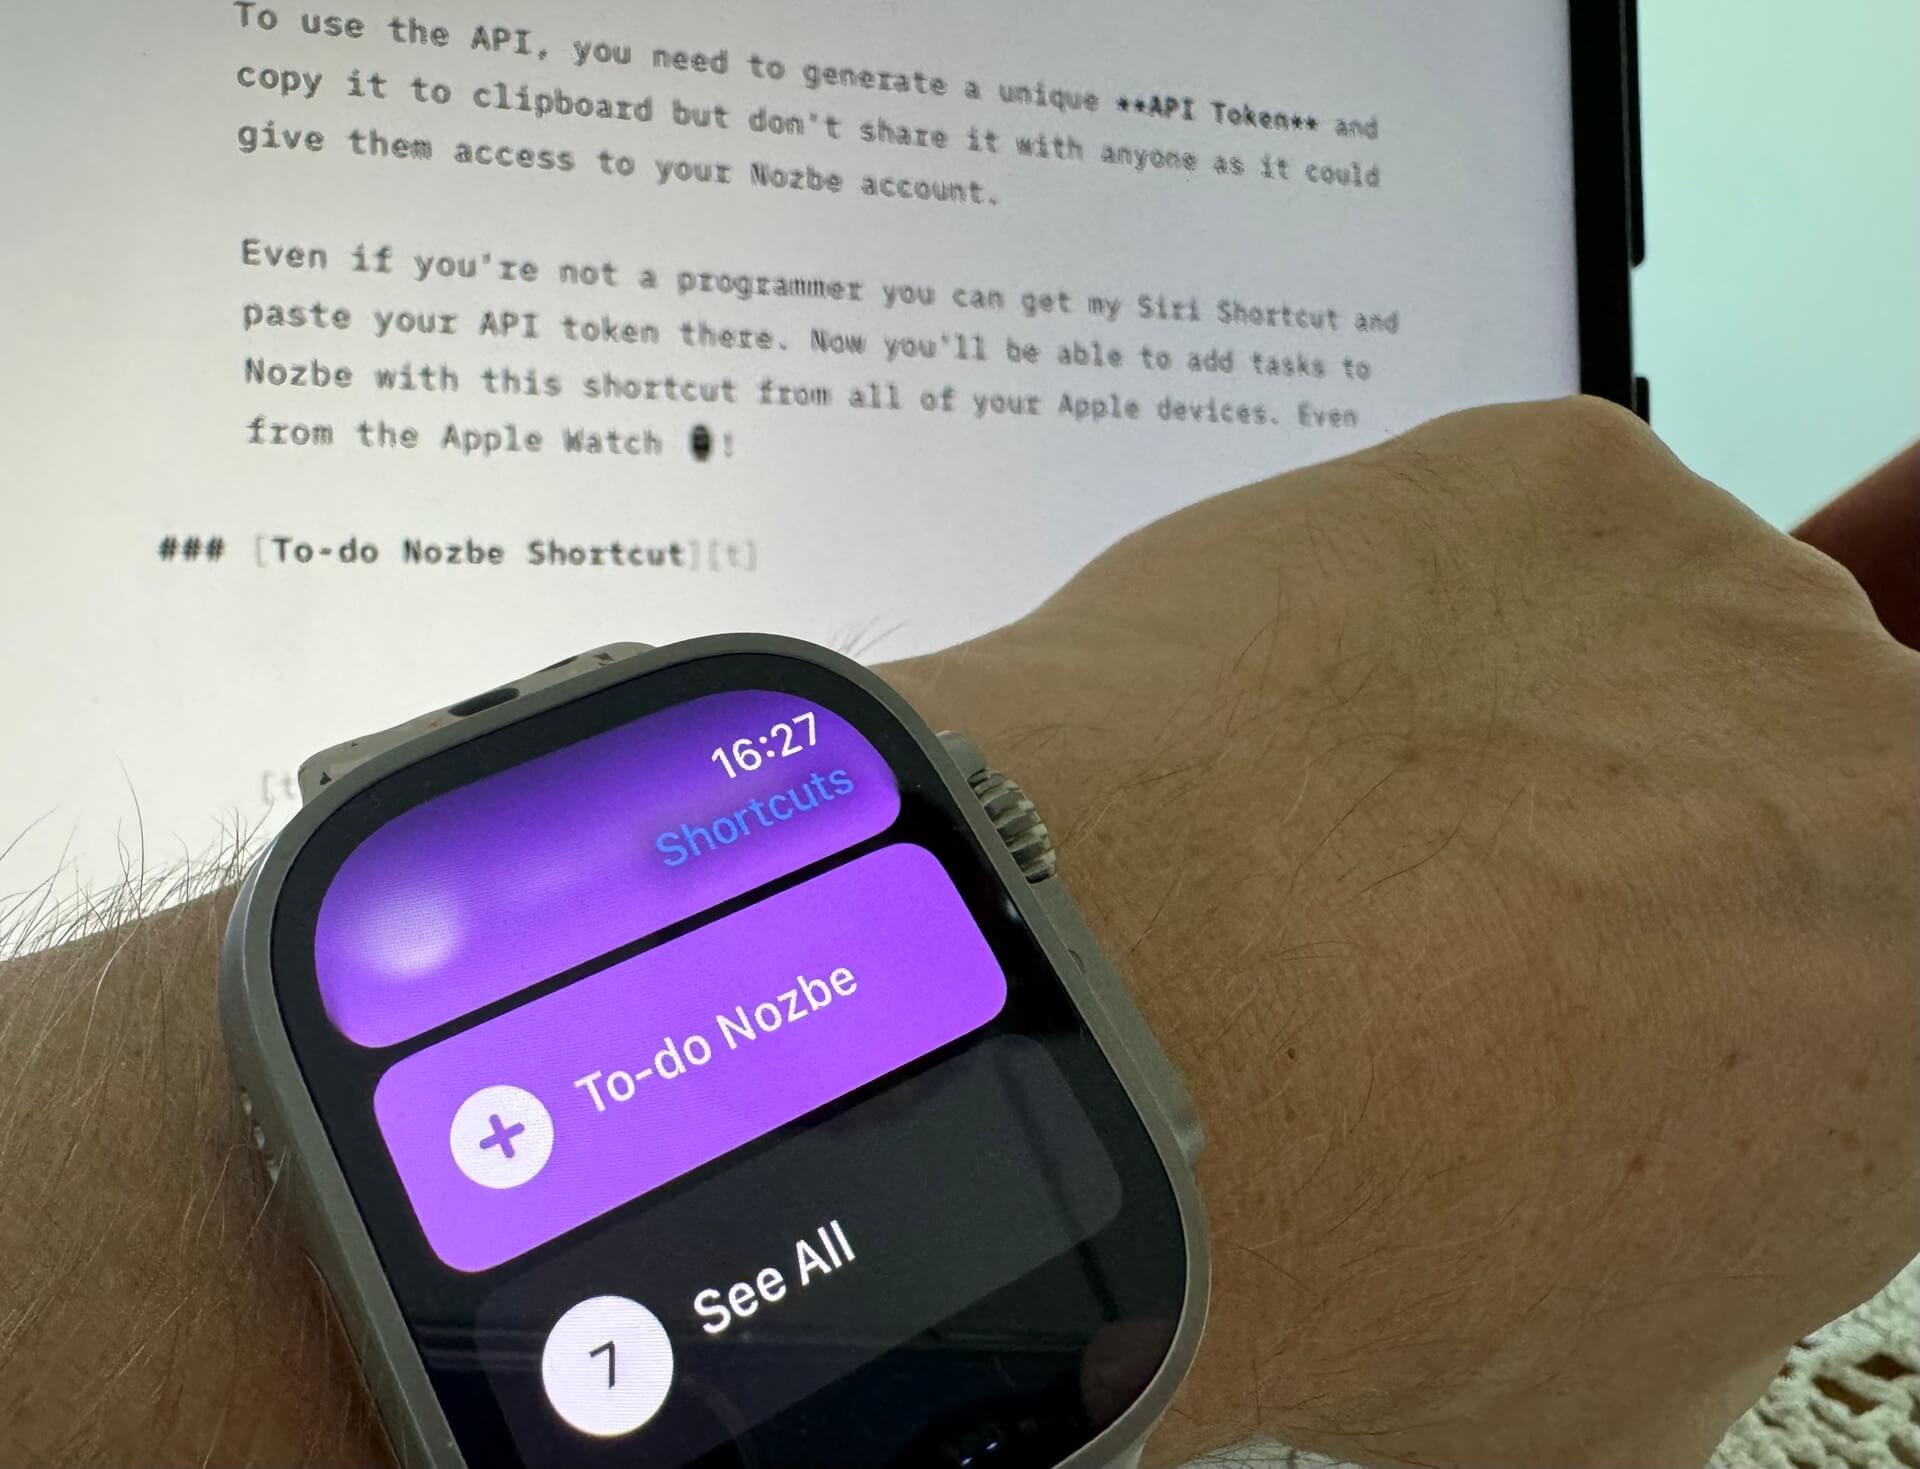 Adding tasks to Nozbe with Email or Siri Shortcuts - even from Apple Watch! watch